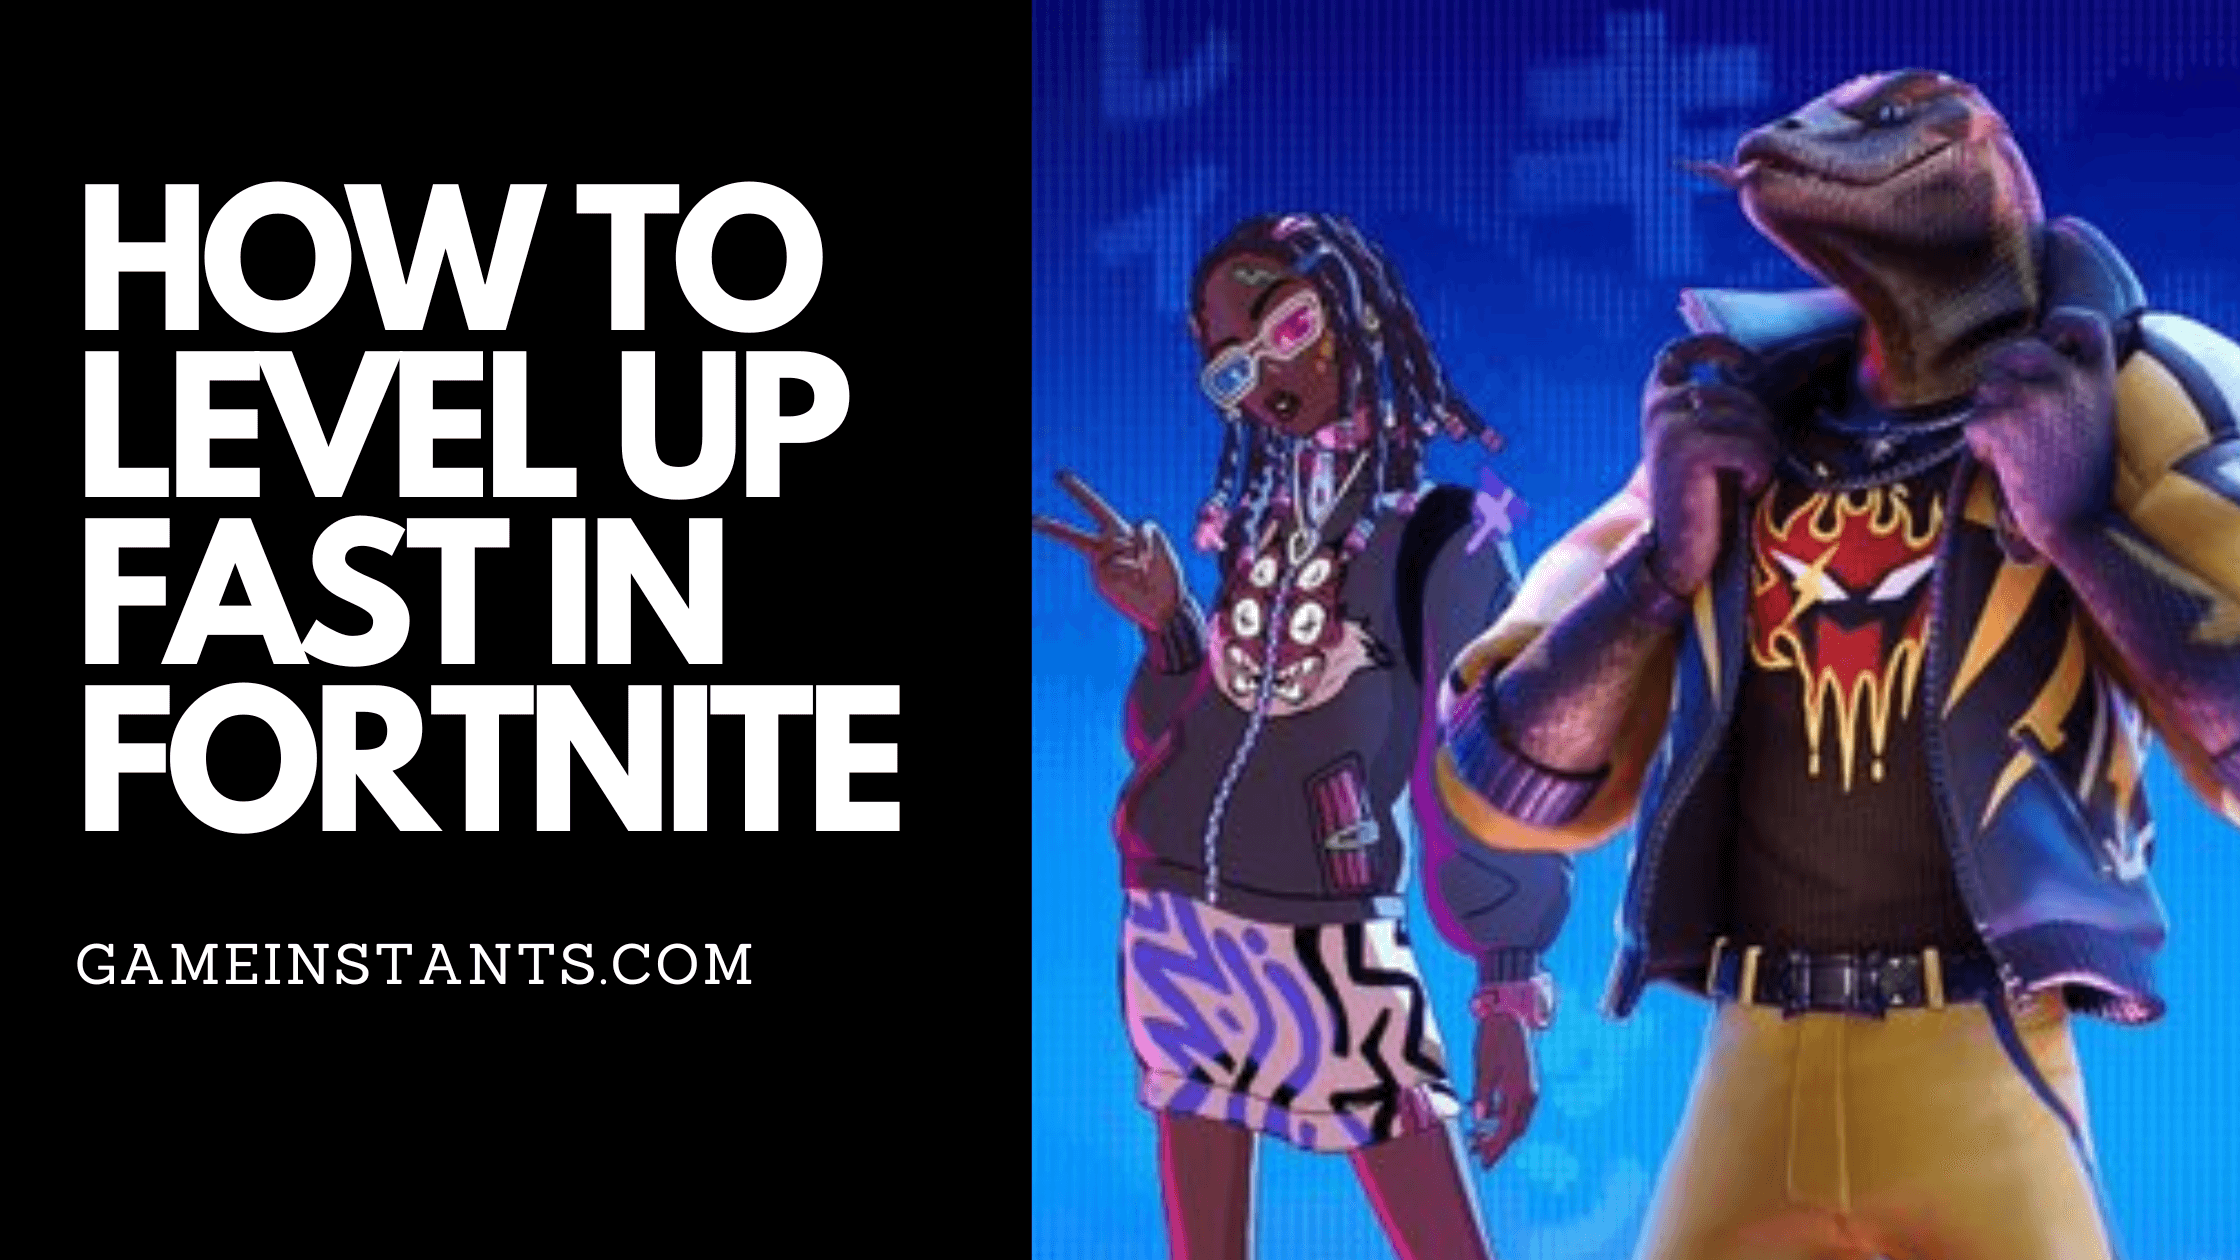 How To Level Up Fast in Fortnite